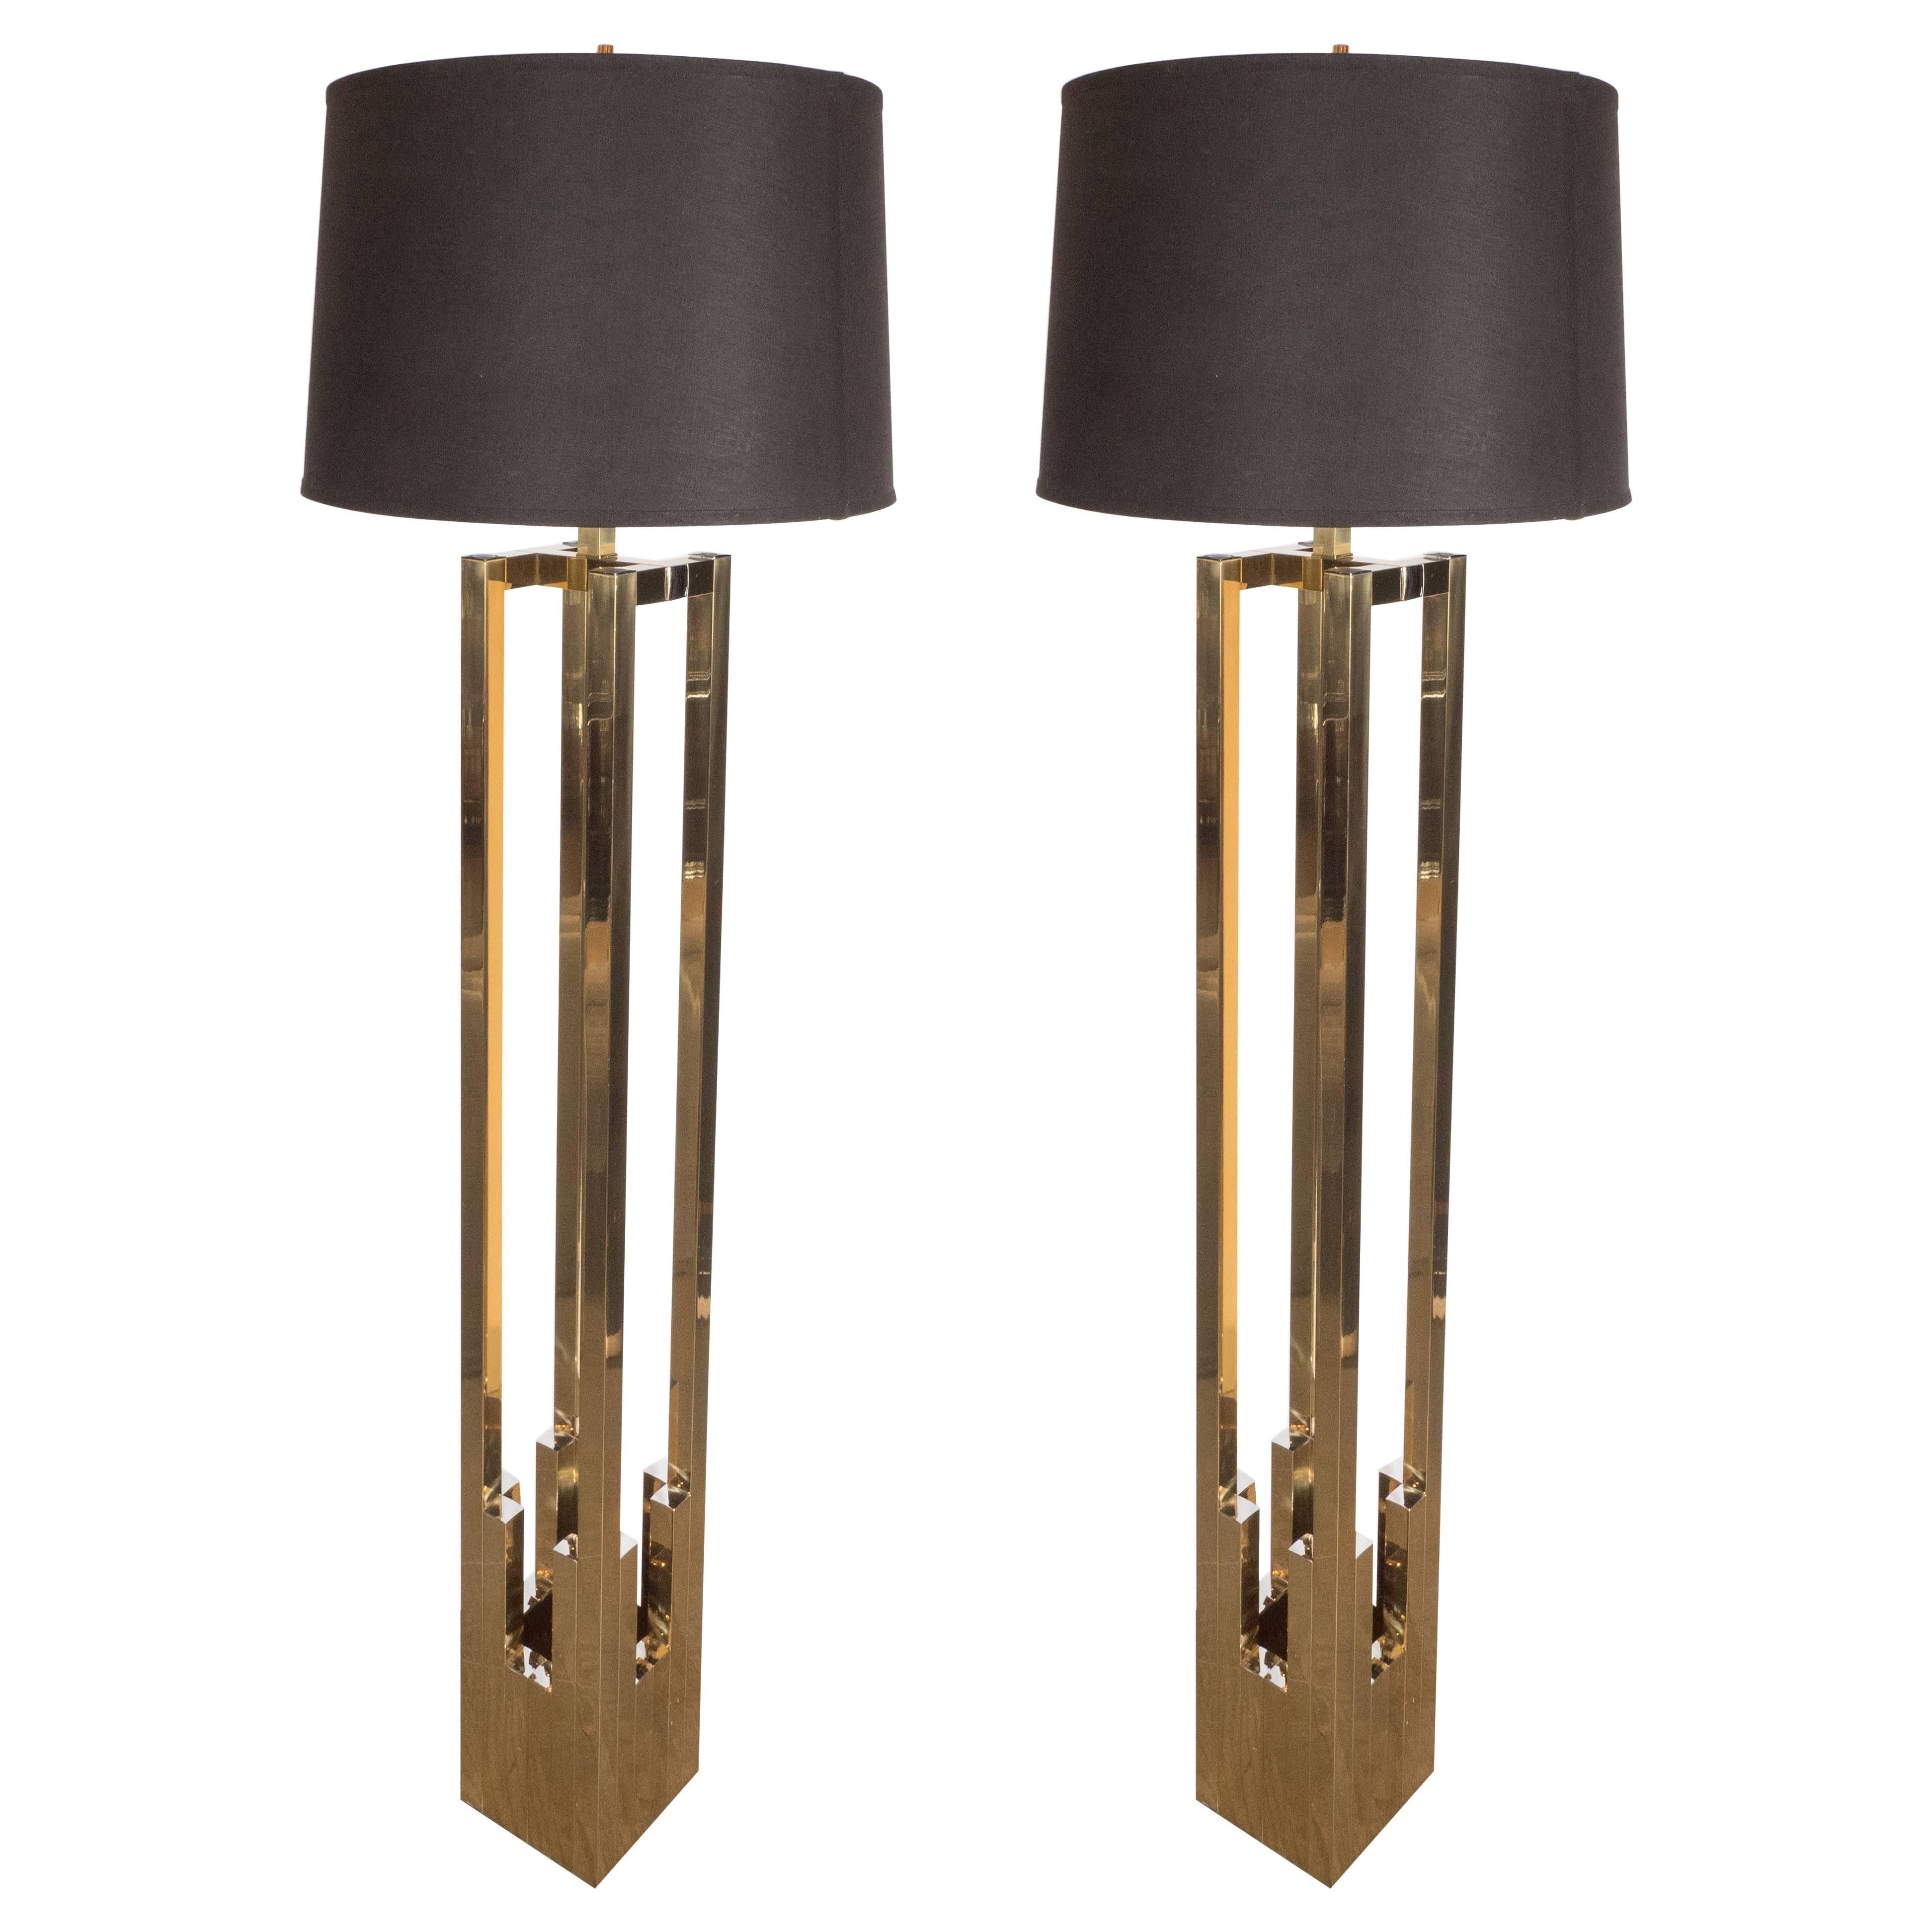 This sophisticated pair of Mid-Century Modernist floor lamps by Willy Rizzo for Lumica, features skyscraper style stepped detailing in contrasting polished brass with chrome accents. Each fixture holds (2) 100 watt Edison-base bulbs and features